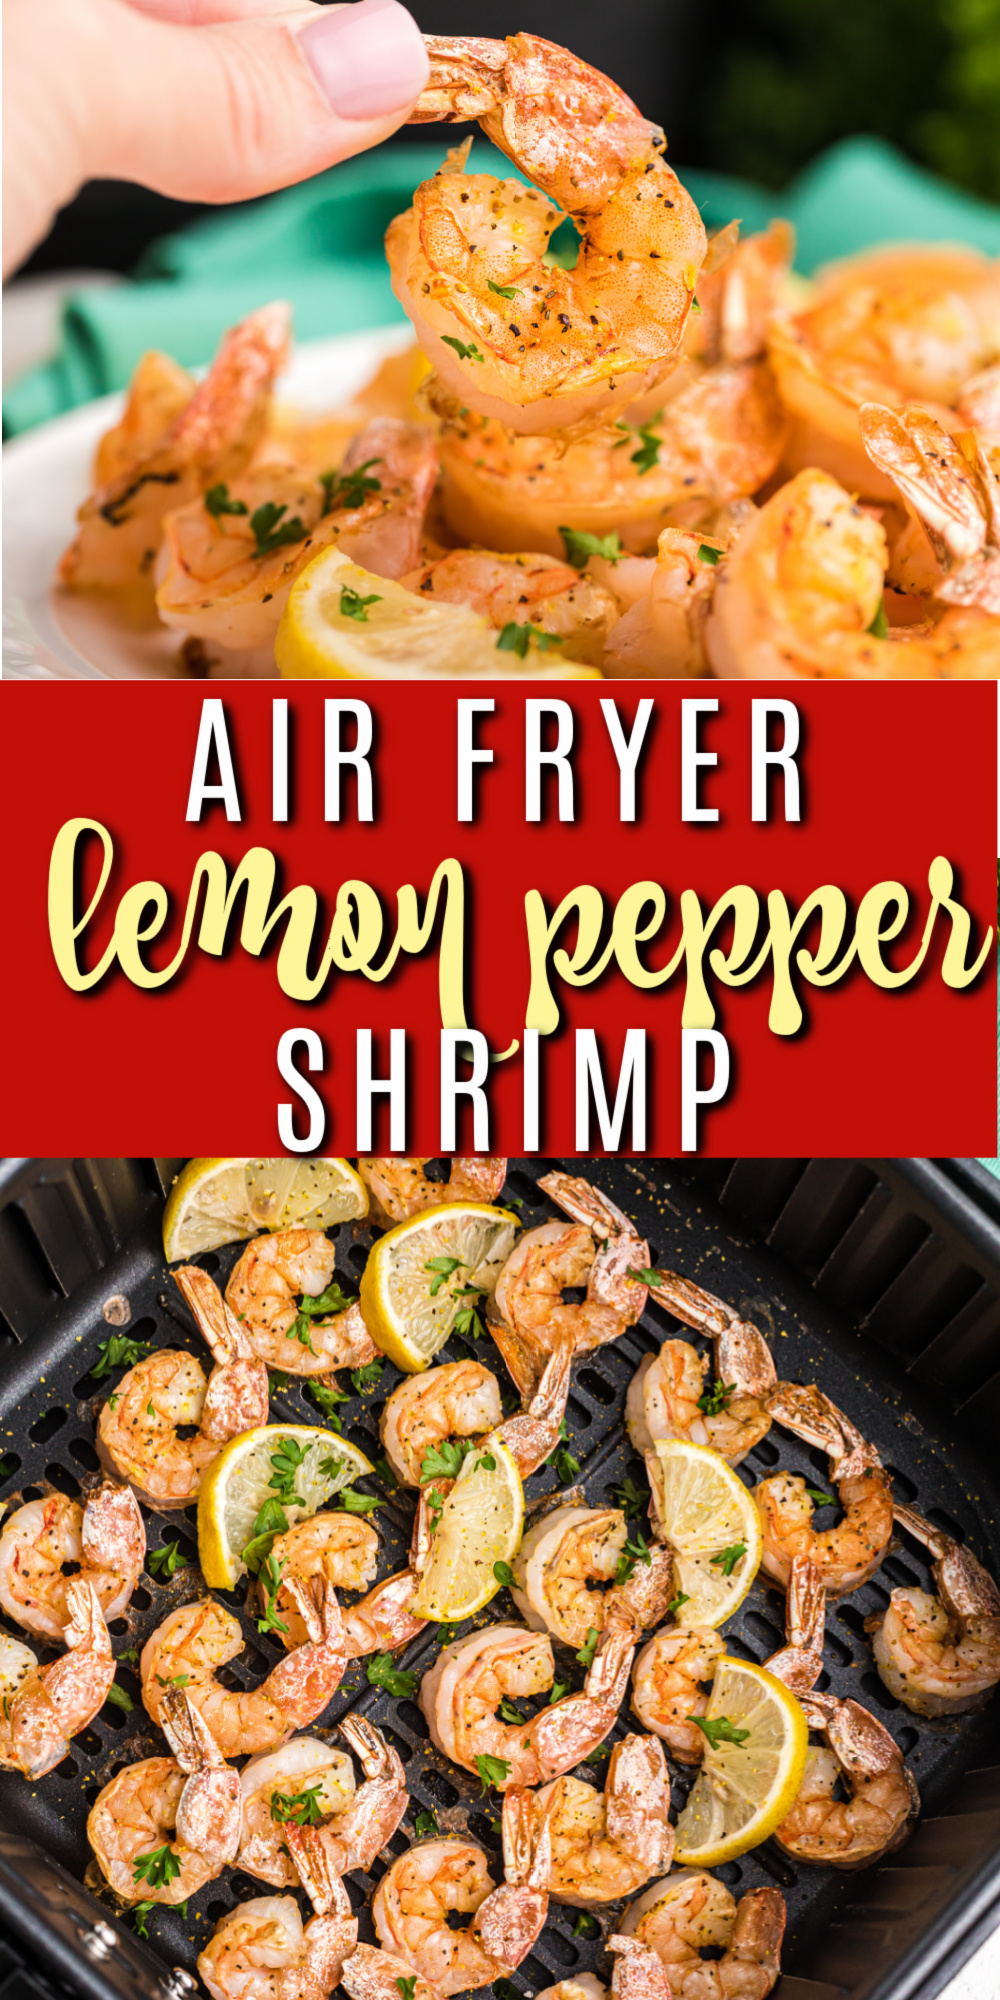 This lemon pepper air fryer shrimp recipe is one of my favorite healthy lunches and also makes the perfect delicious appetizer. You can use the shrimp over a bed of lettuce for a salad, or even in shrimp tacos. You can also eat them all by themselves! It's a light and low carb dish that's a personal favorite and made in just minutes.